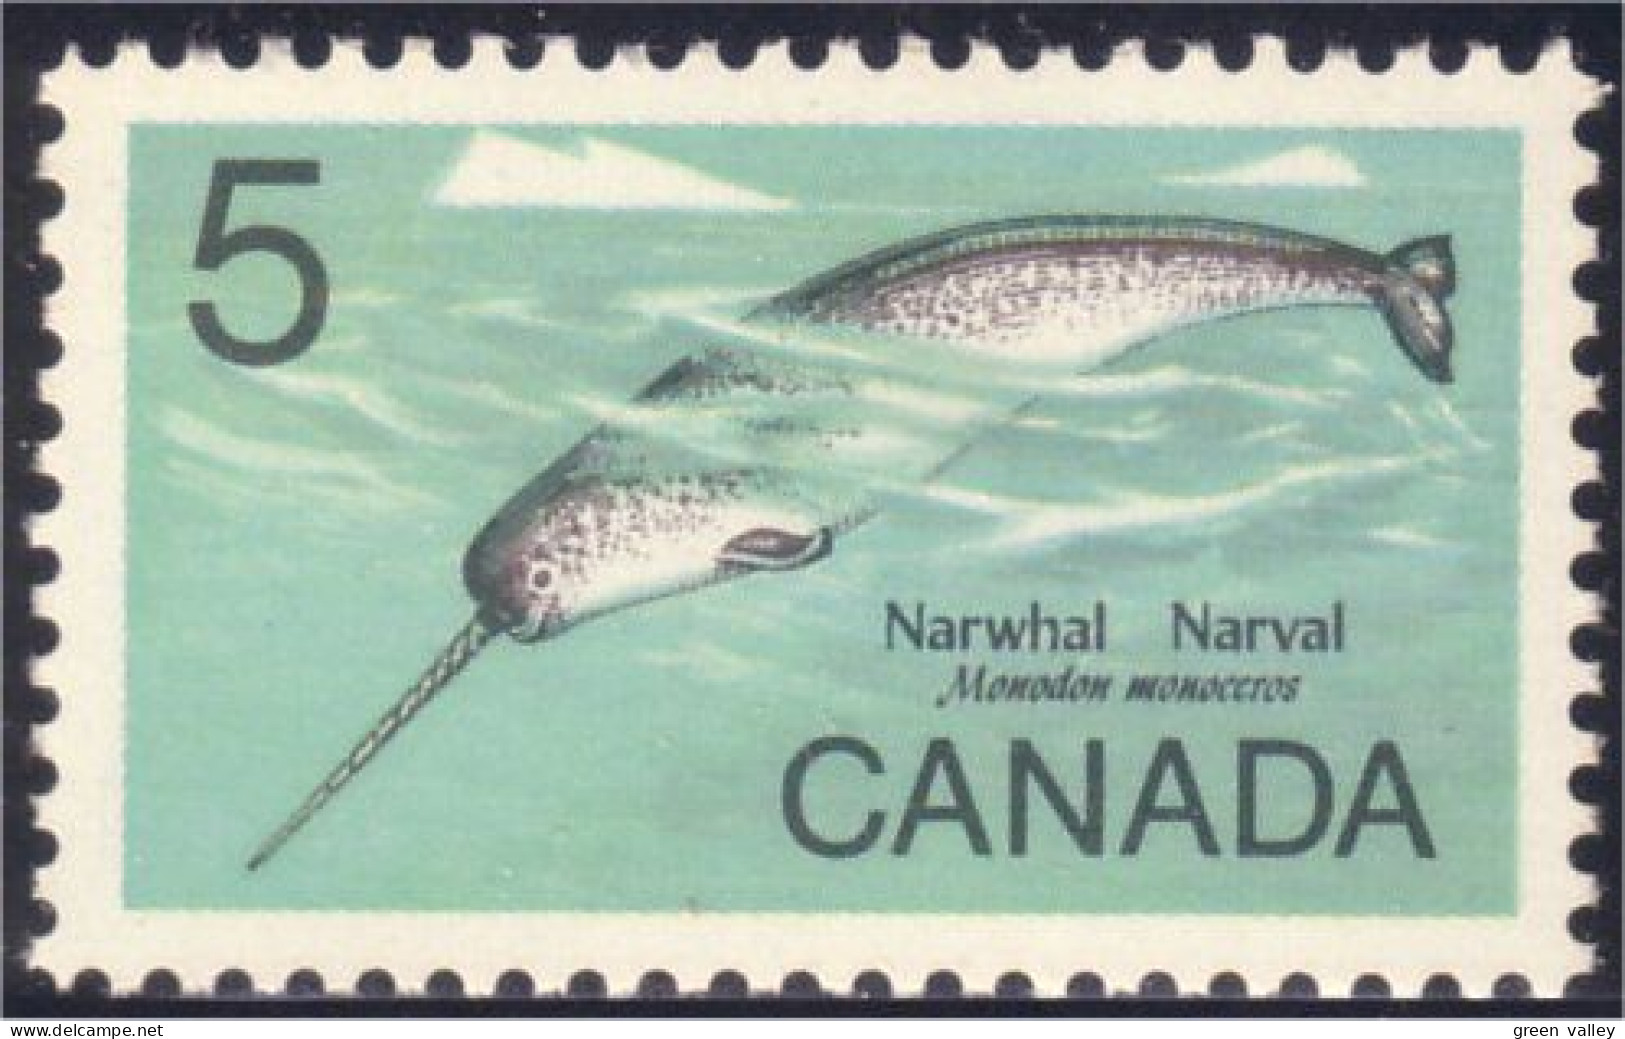 Canada Narwhal Rostre Narval Narwhal Fluorescent MNH ** Neuf SC (04-80iid) - Minéraux